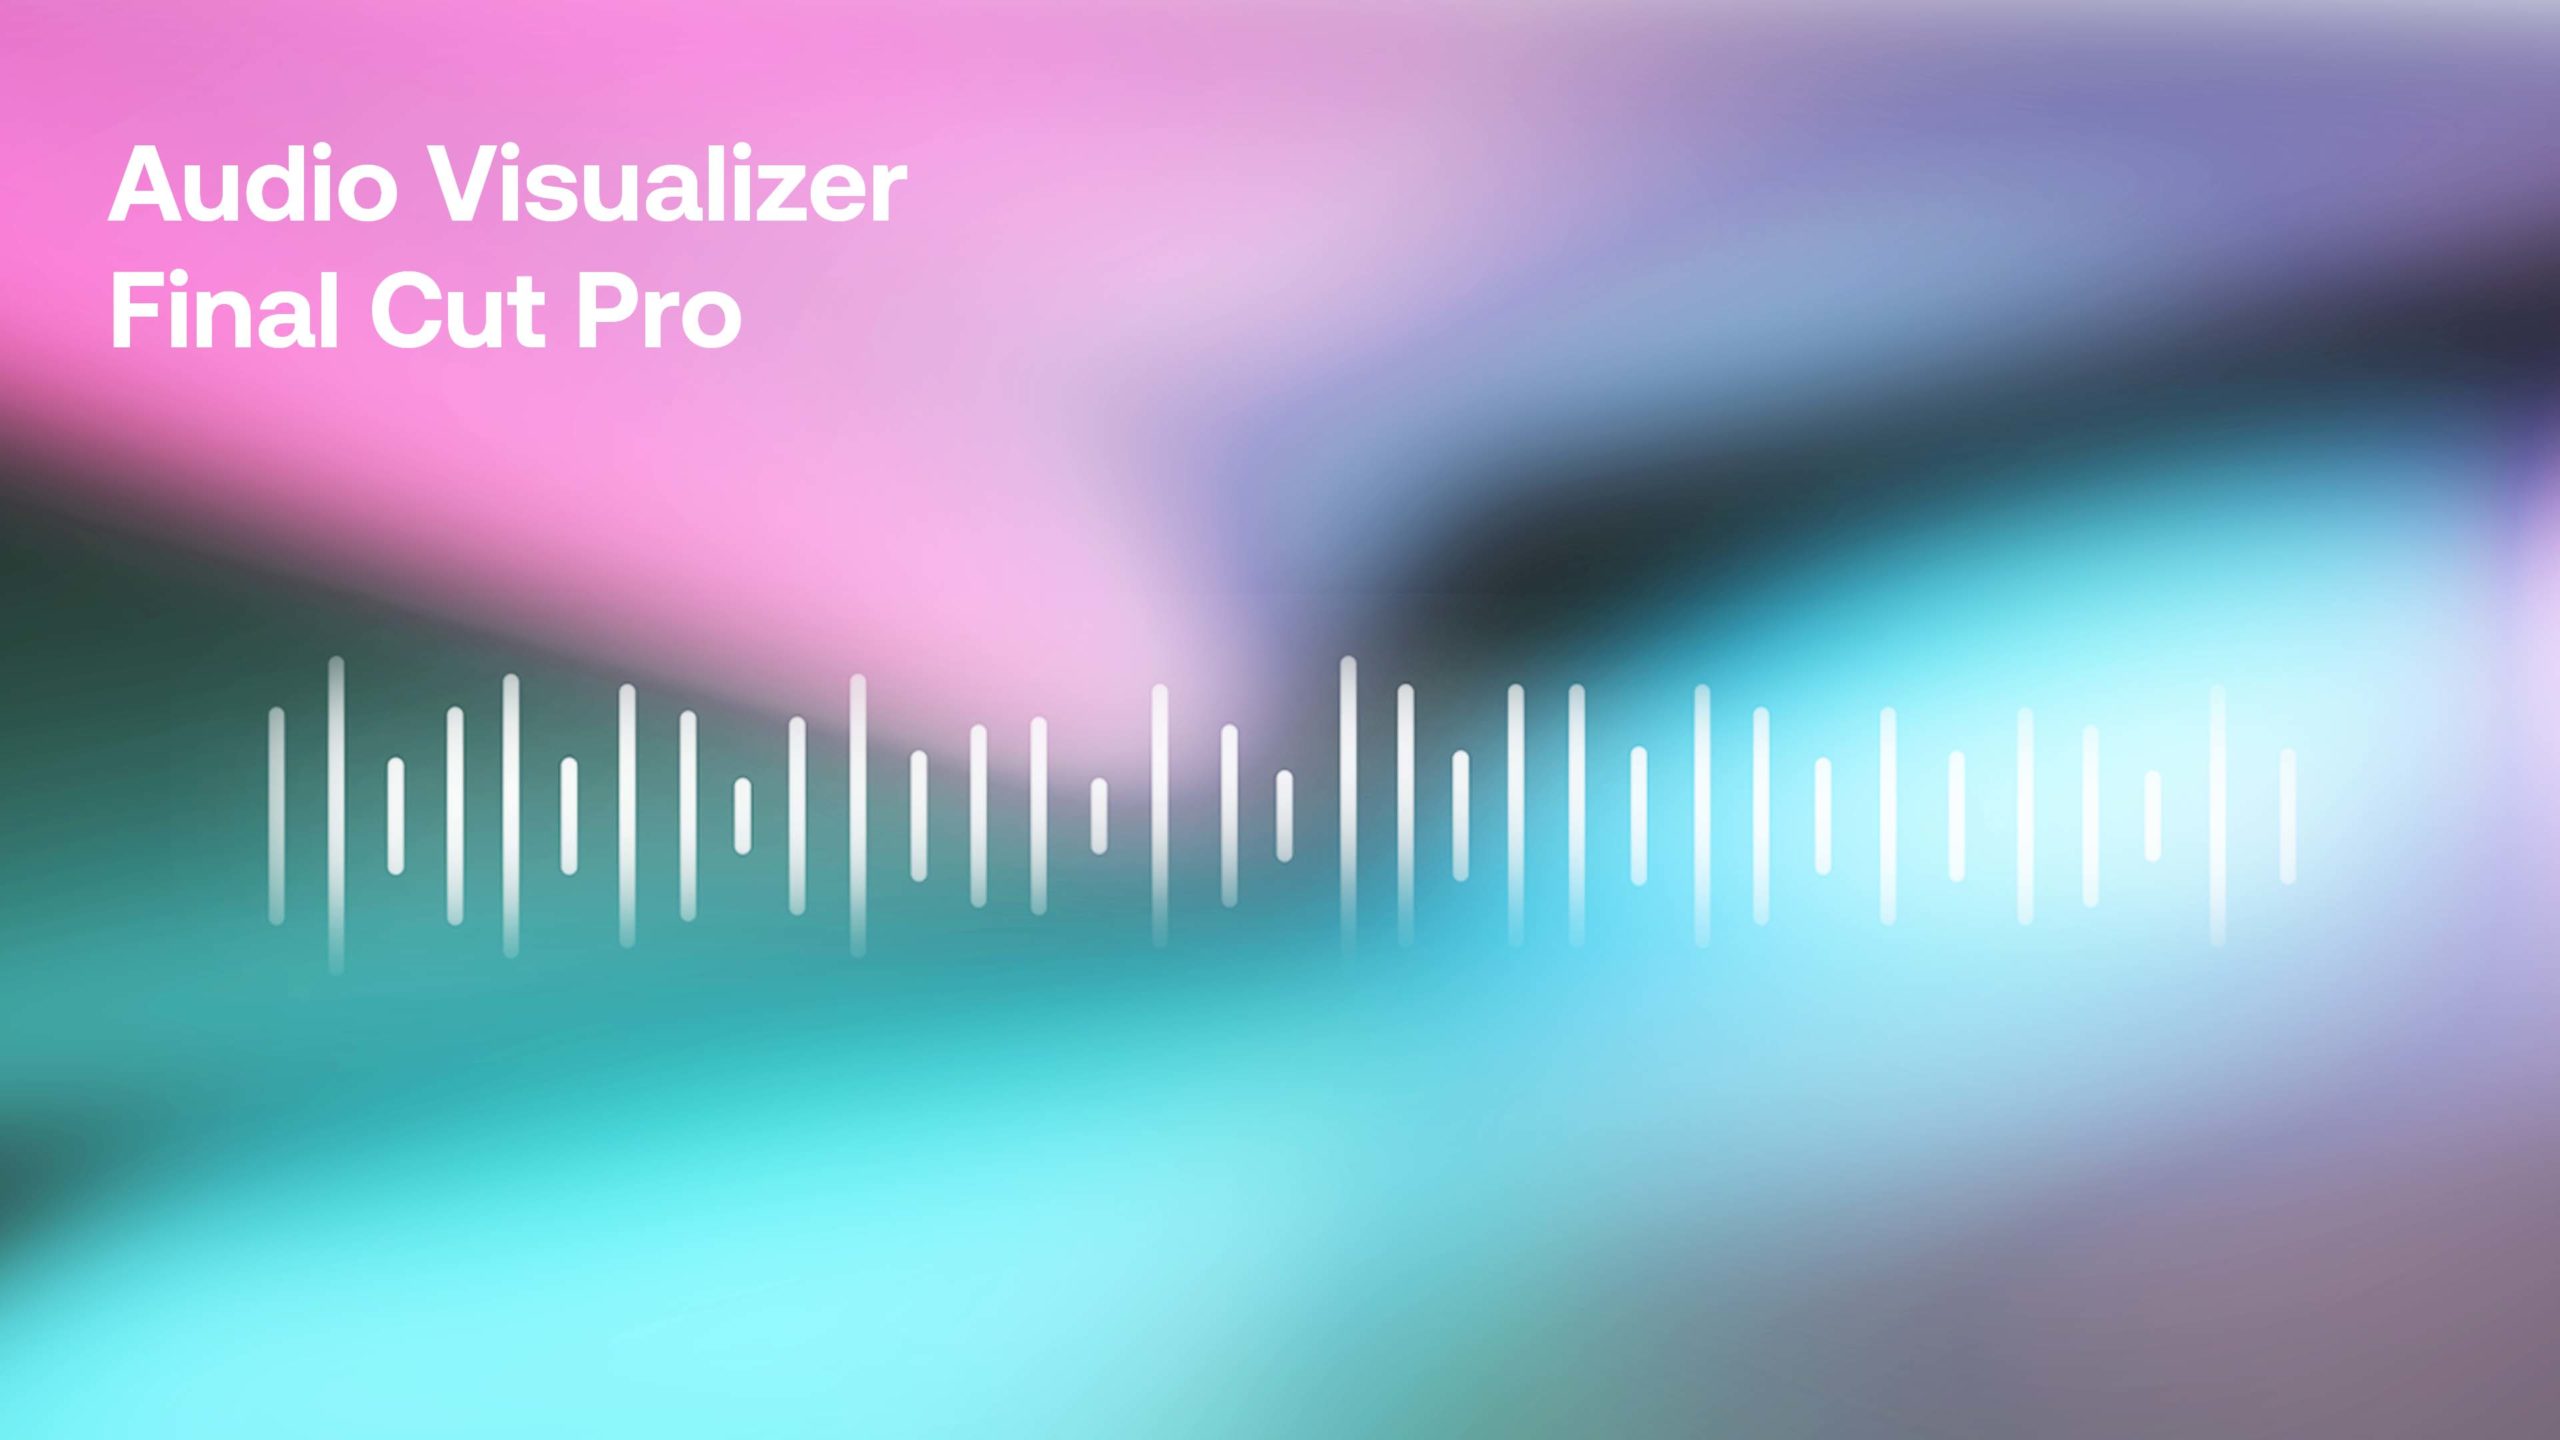 fcpx stabilizer 2.0 free download crack